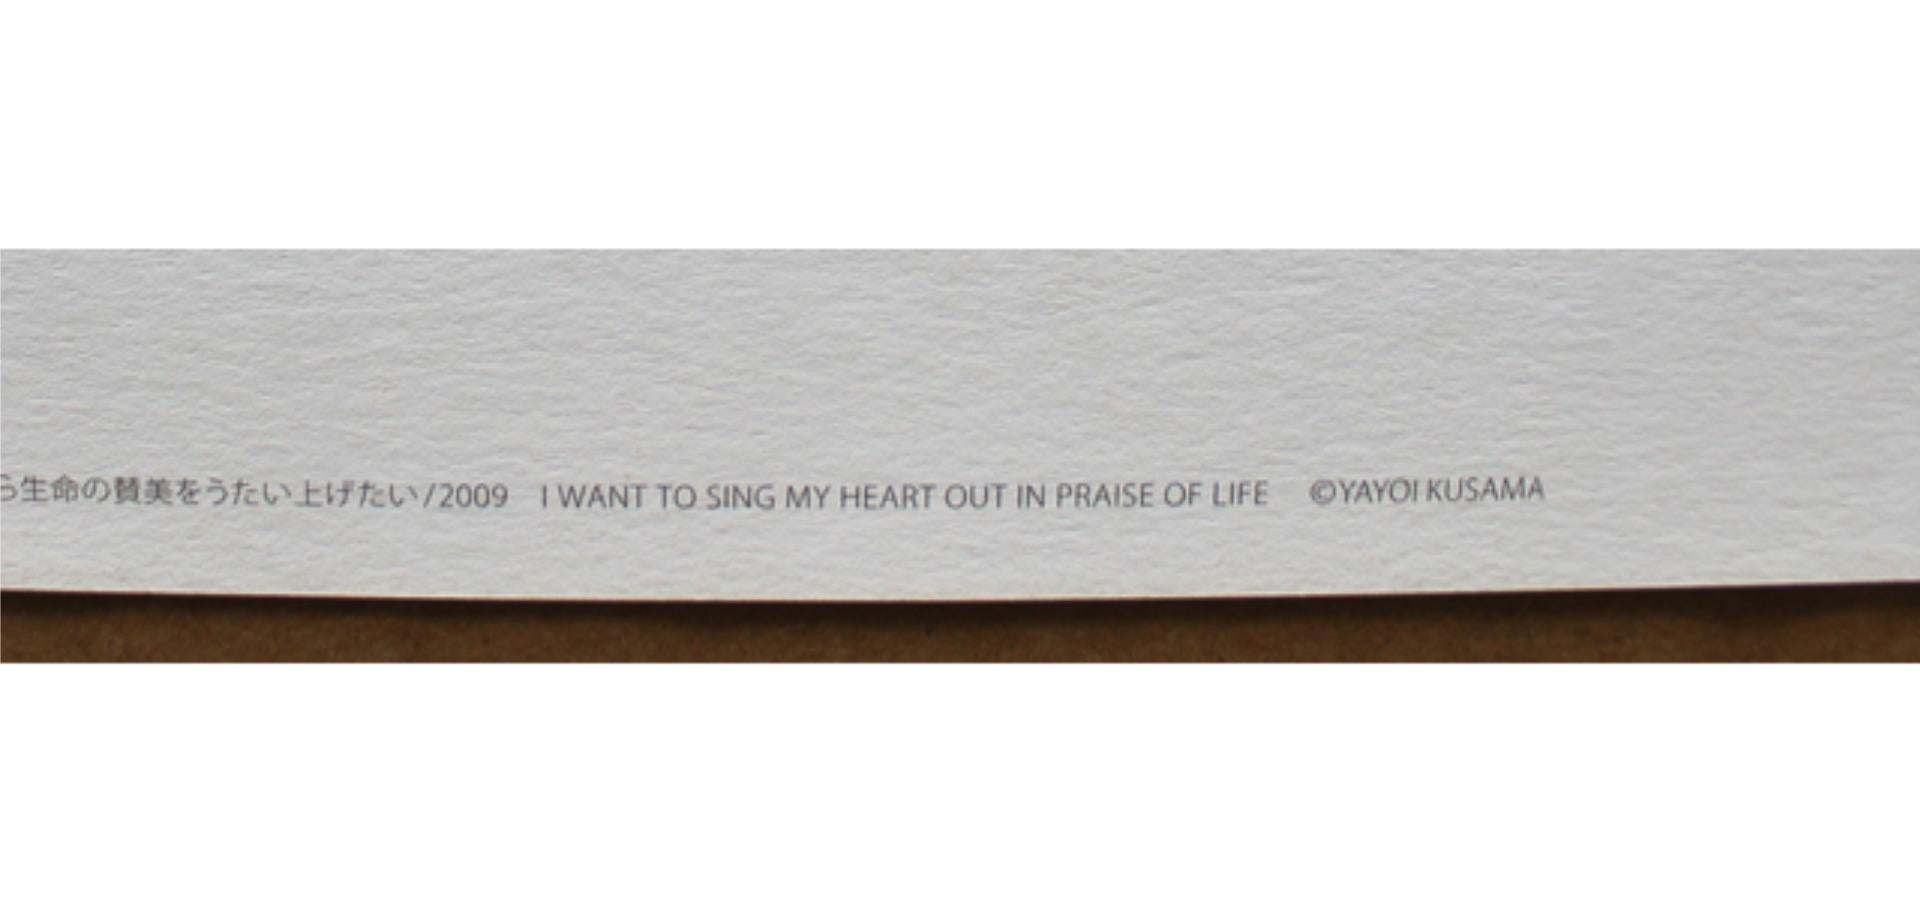 I Want To Sing My Heart Out In Praise of Life, Yayoi Kusama im Angebot 2